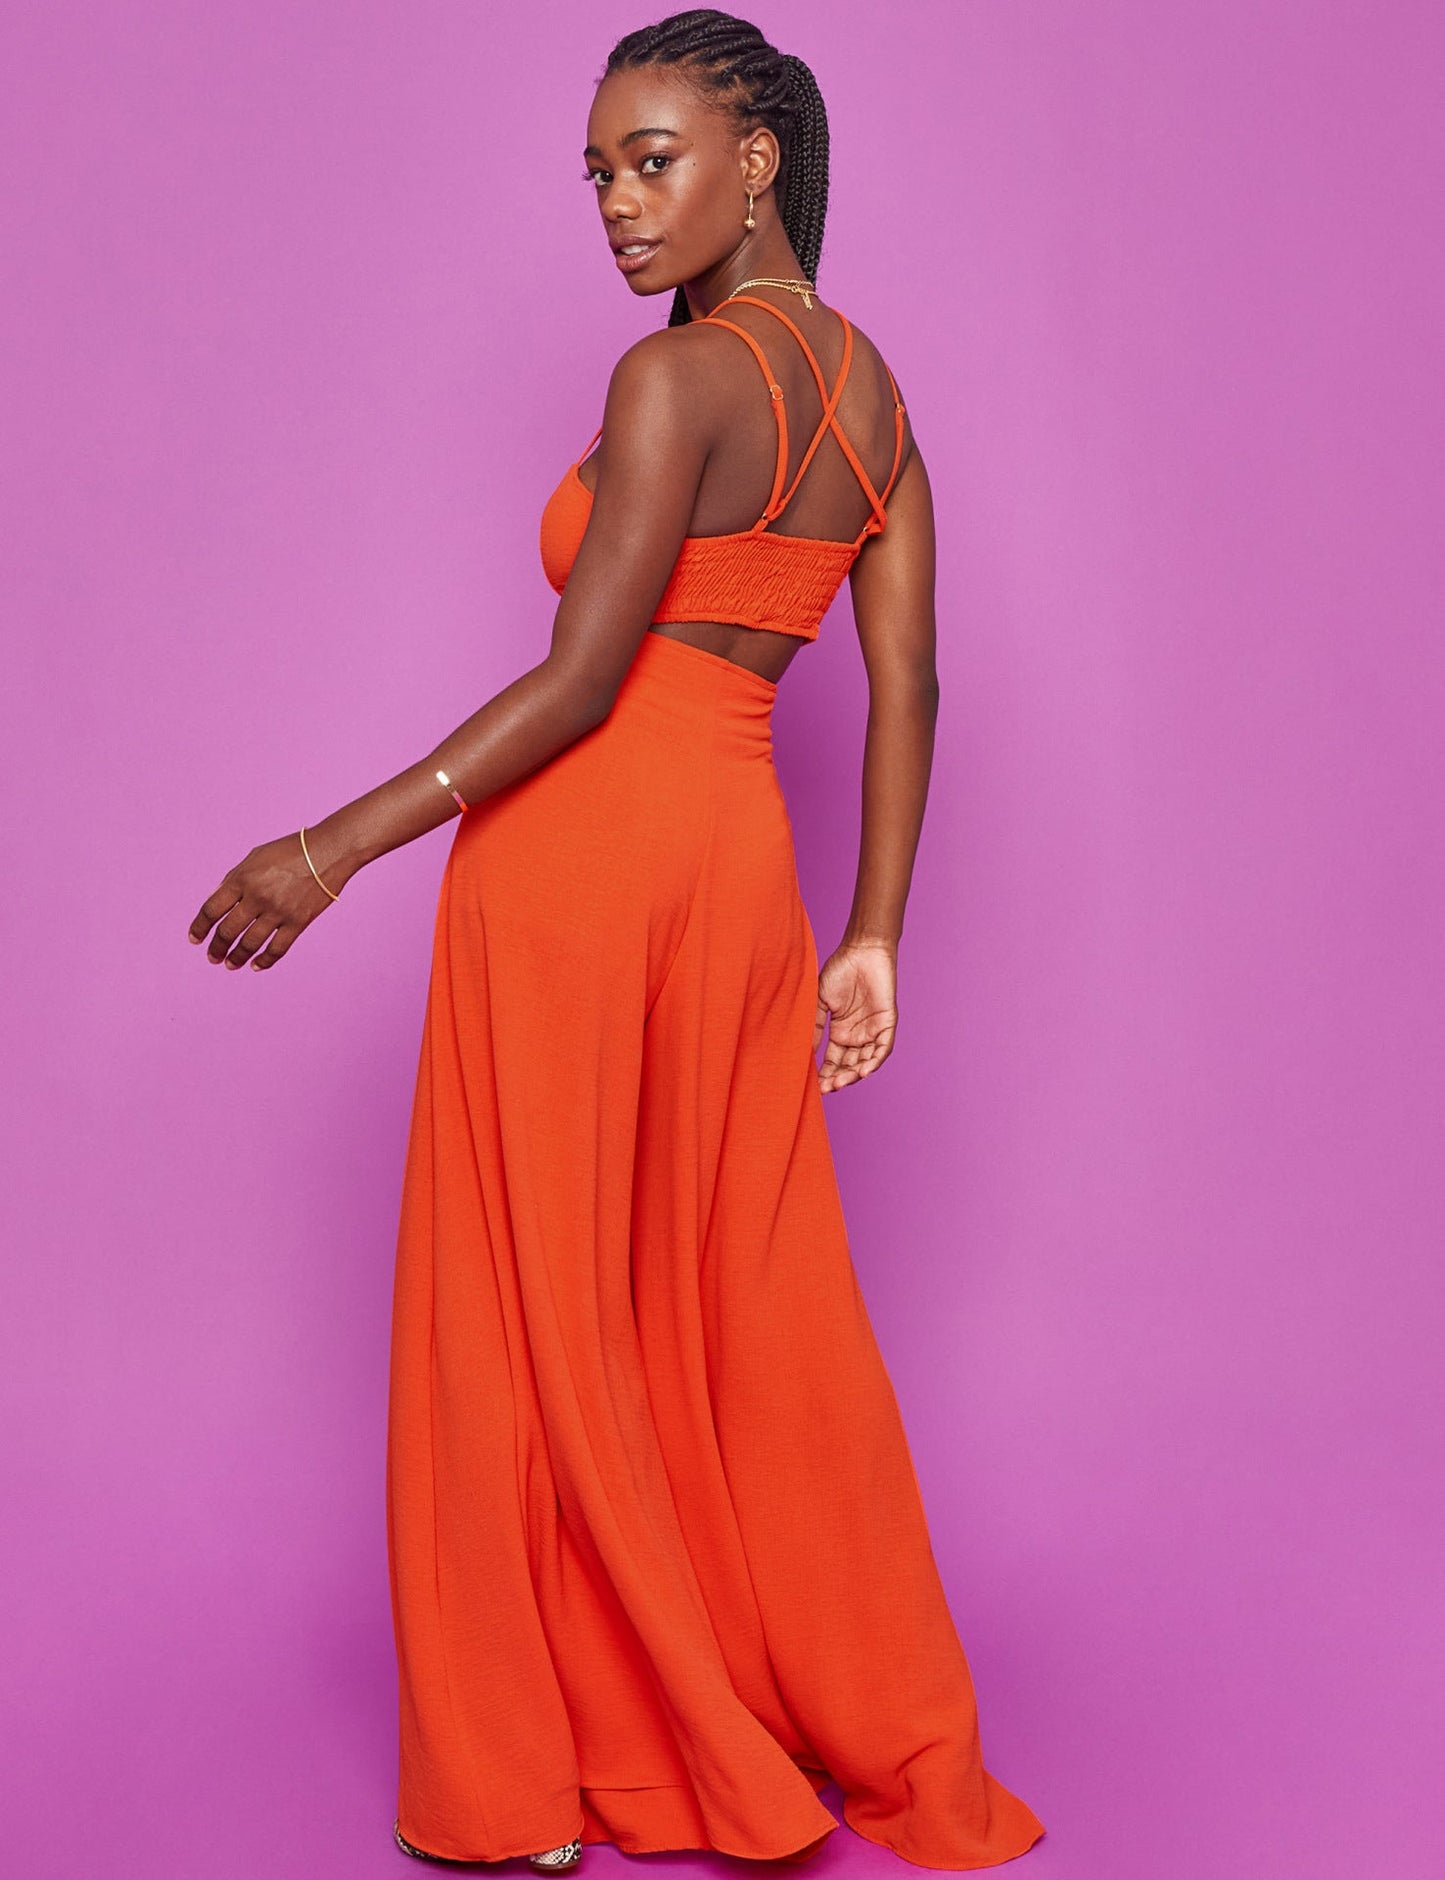 Sexy Strapless Women Two Pieces Suits-Suits-Orange-S-Free Shipping Leatheretro